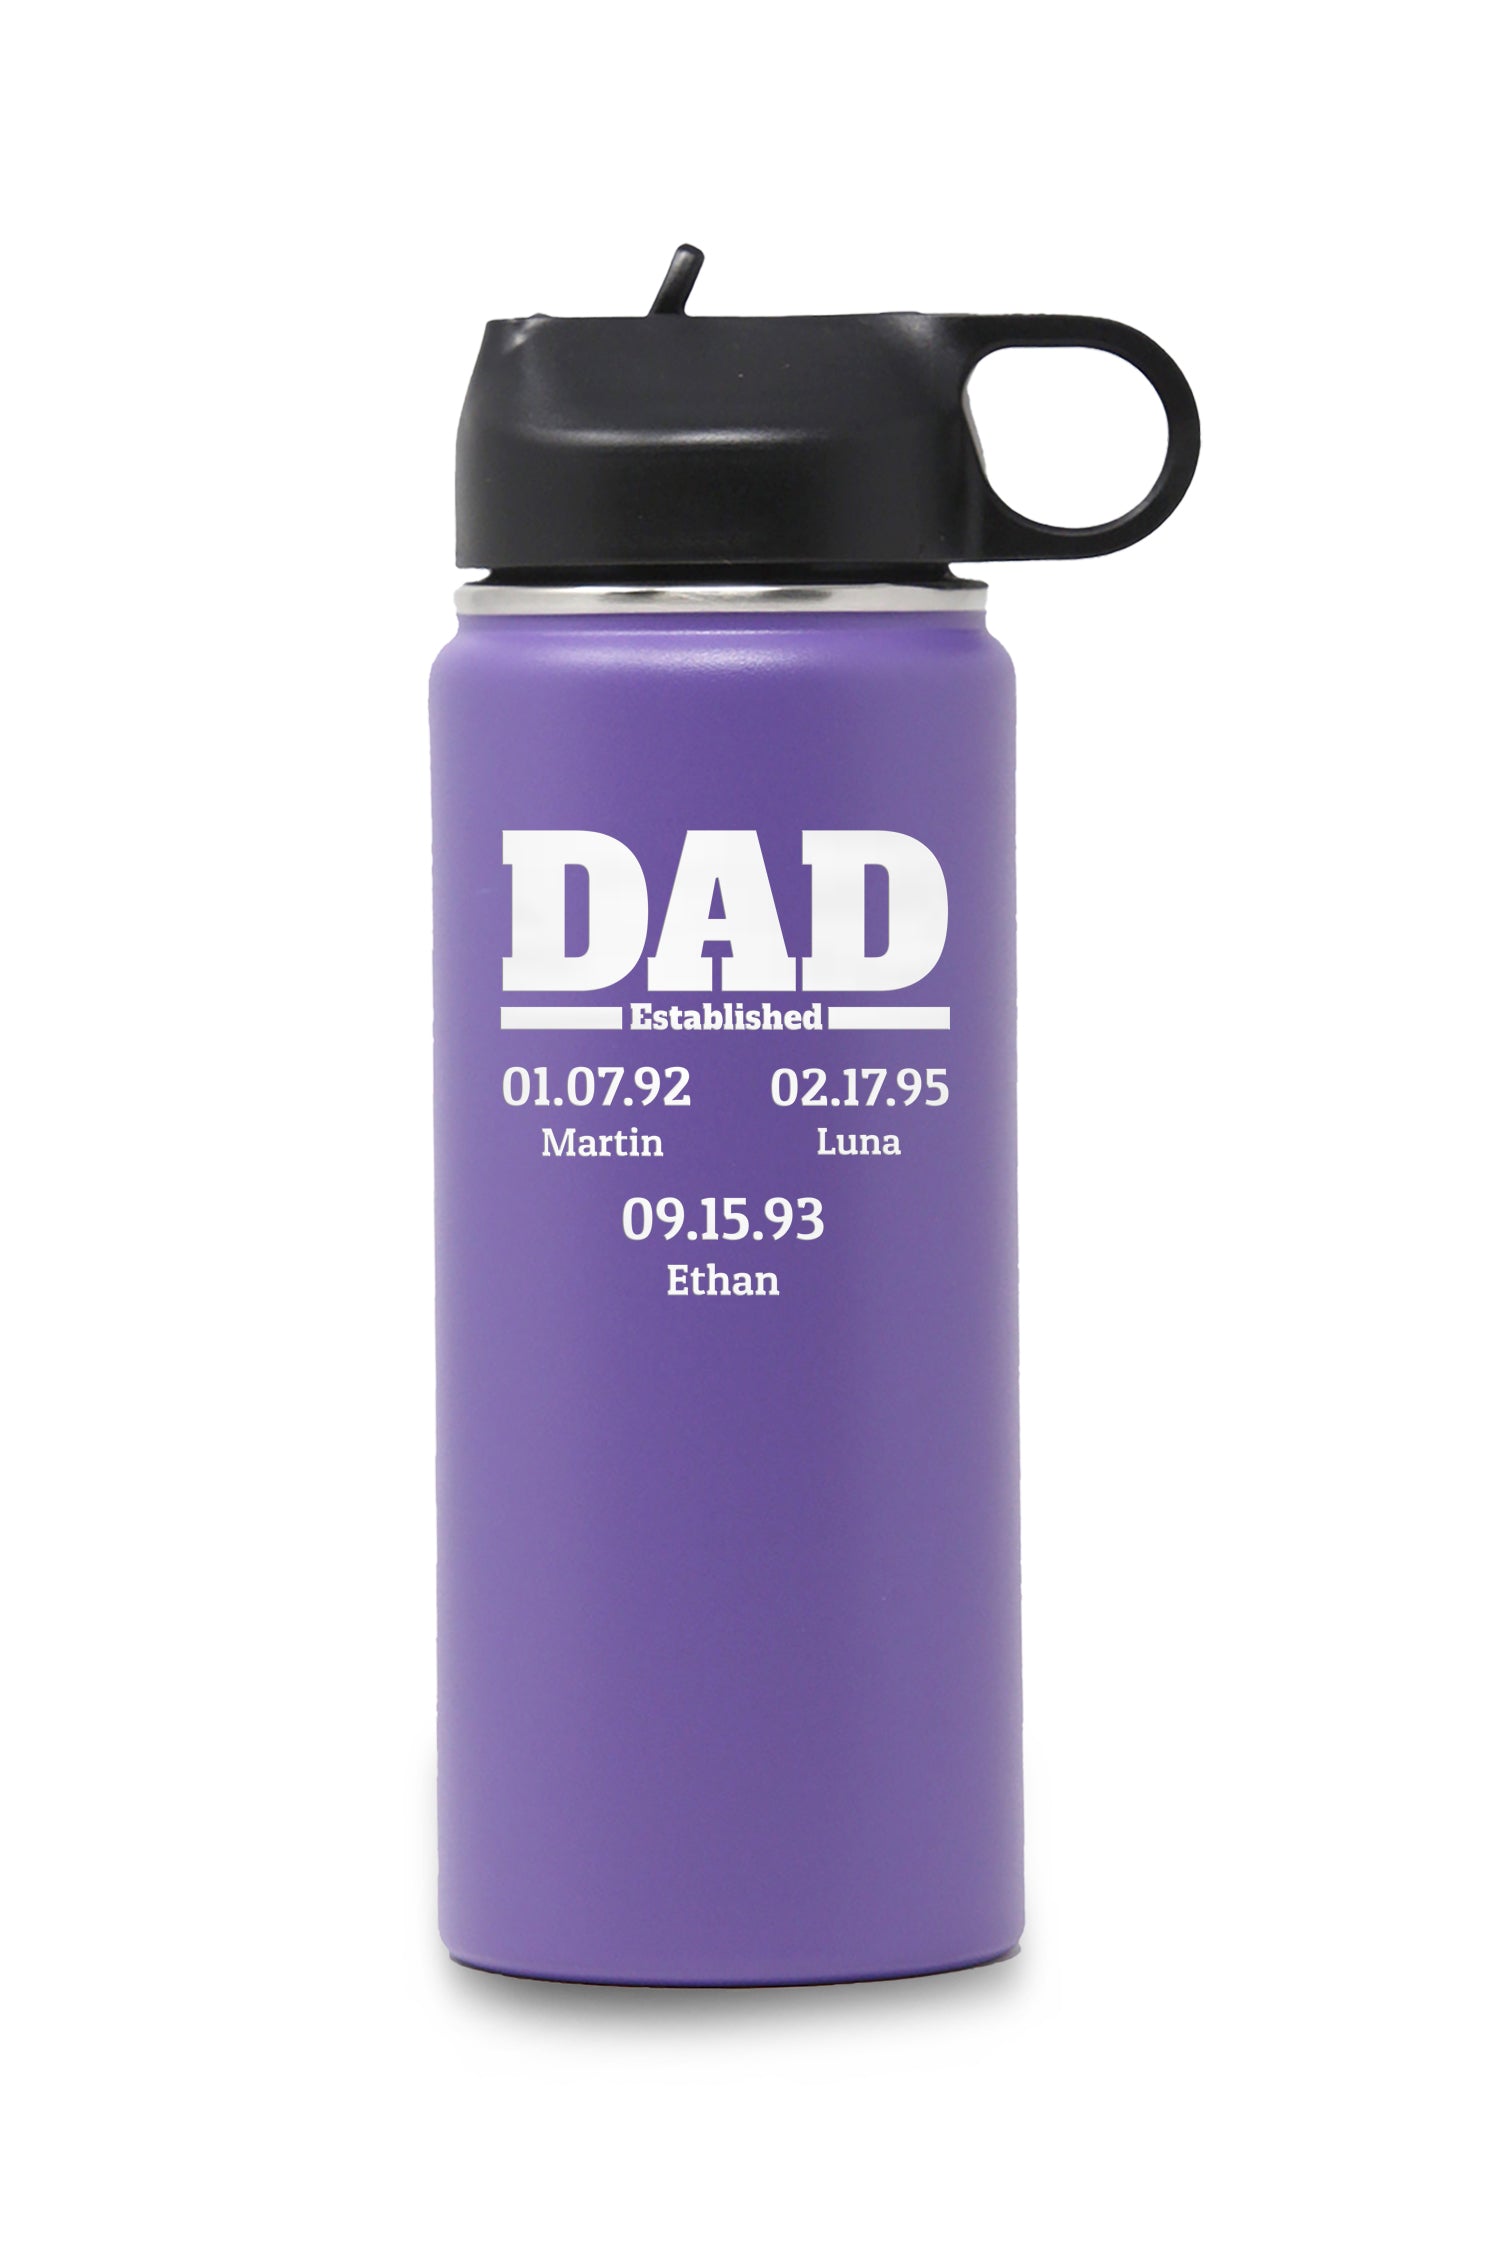 18oz Dad Established Water Bottle with Lid and Straw, Insulated Stainless Steel Sports Water Bottle Double Wall Vacuum Insulated Gift Cup